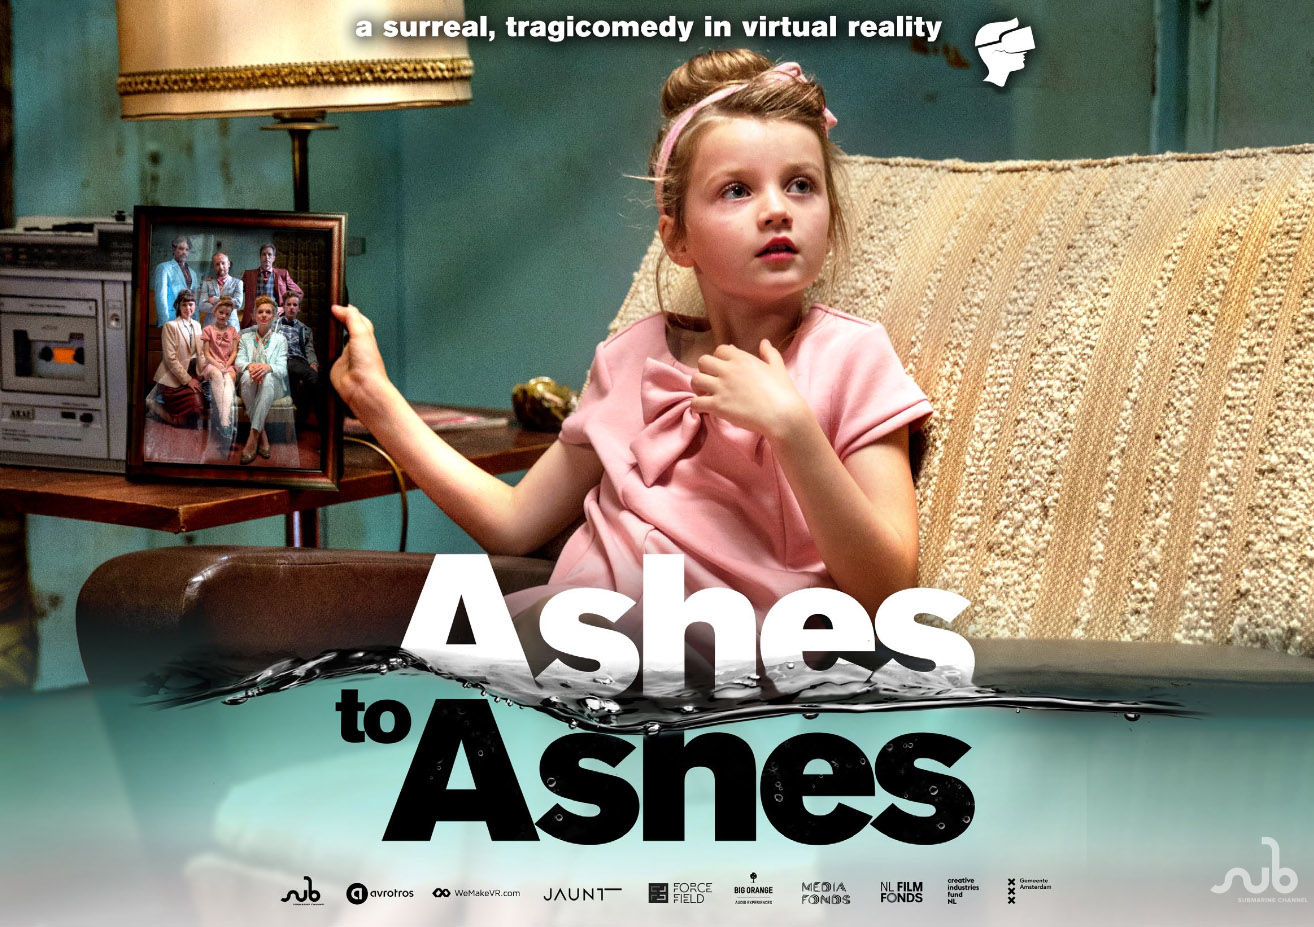 ashes to ashes vr movie review